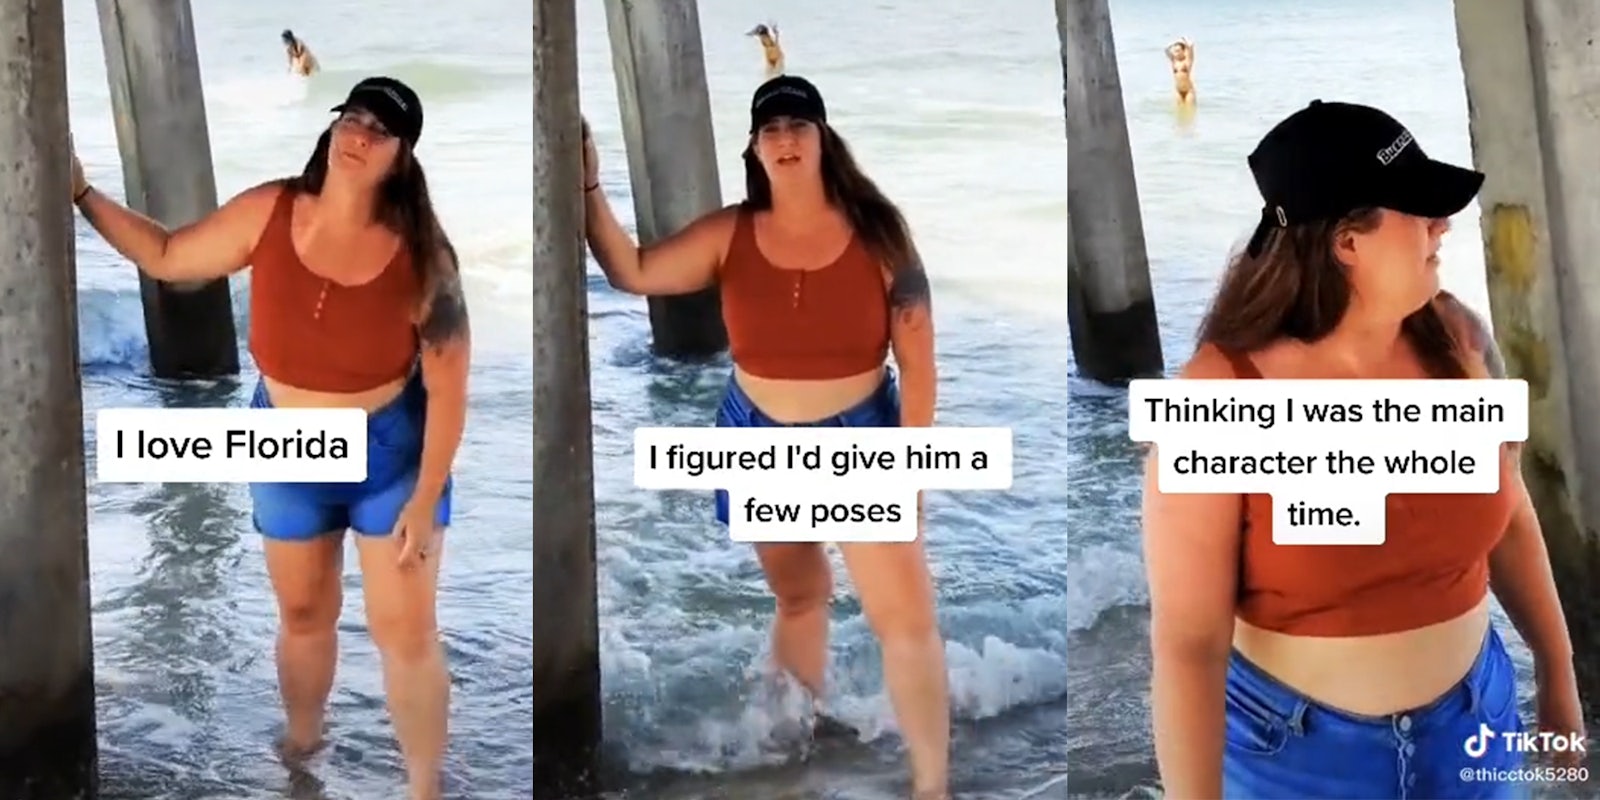 woman posing under pier with captions 'I love Florida' (L) 'I figured I'd give him a few poses' (C) and 'Thinking I was the main character the whole time.' (R)